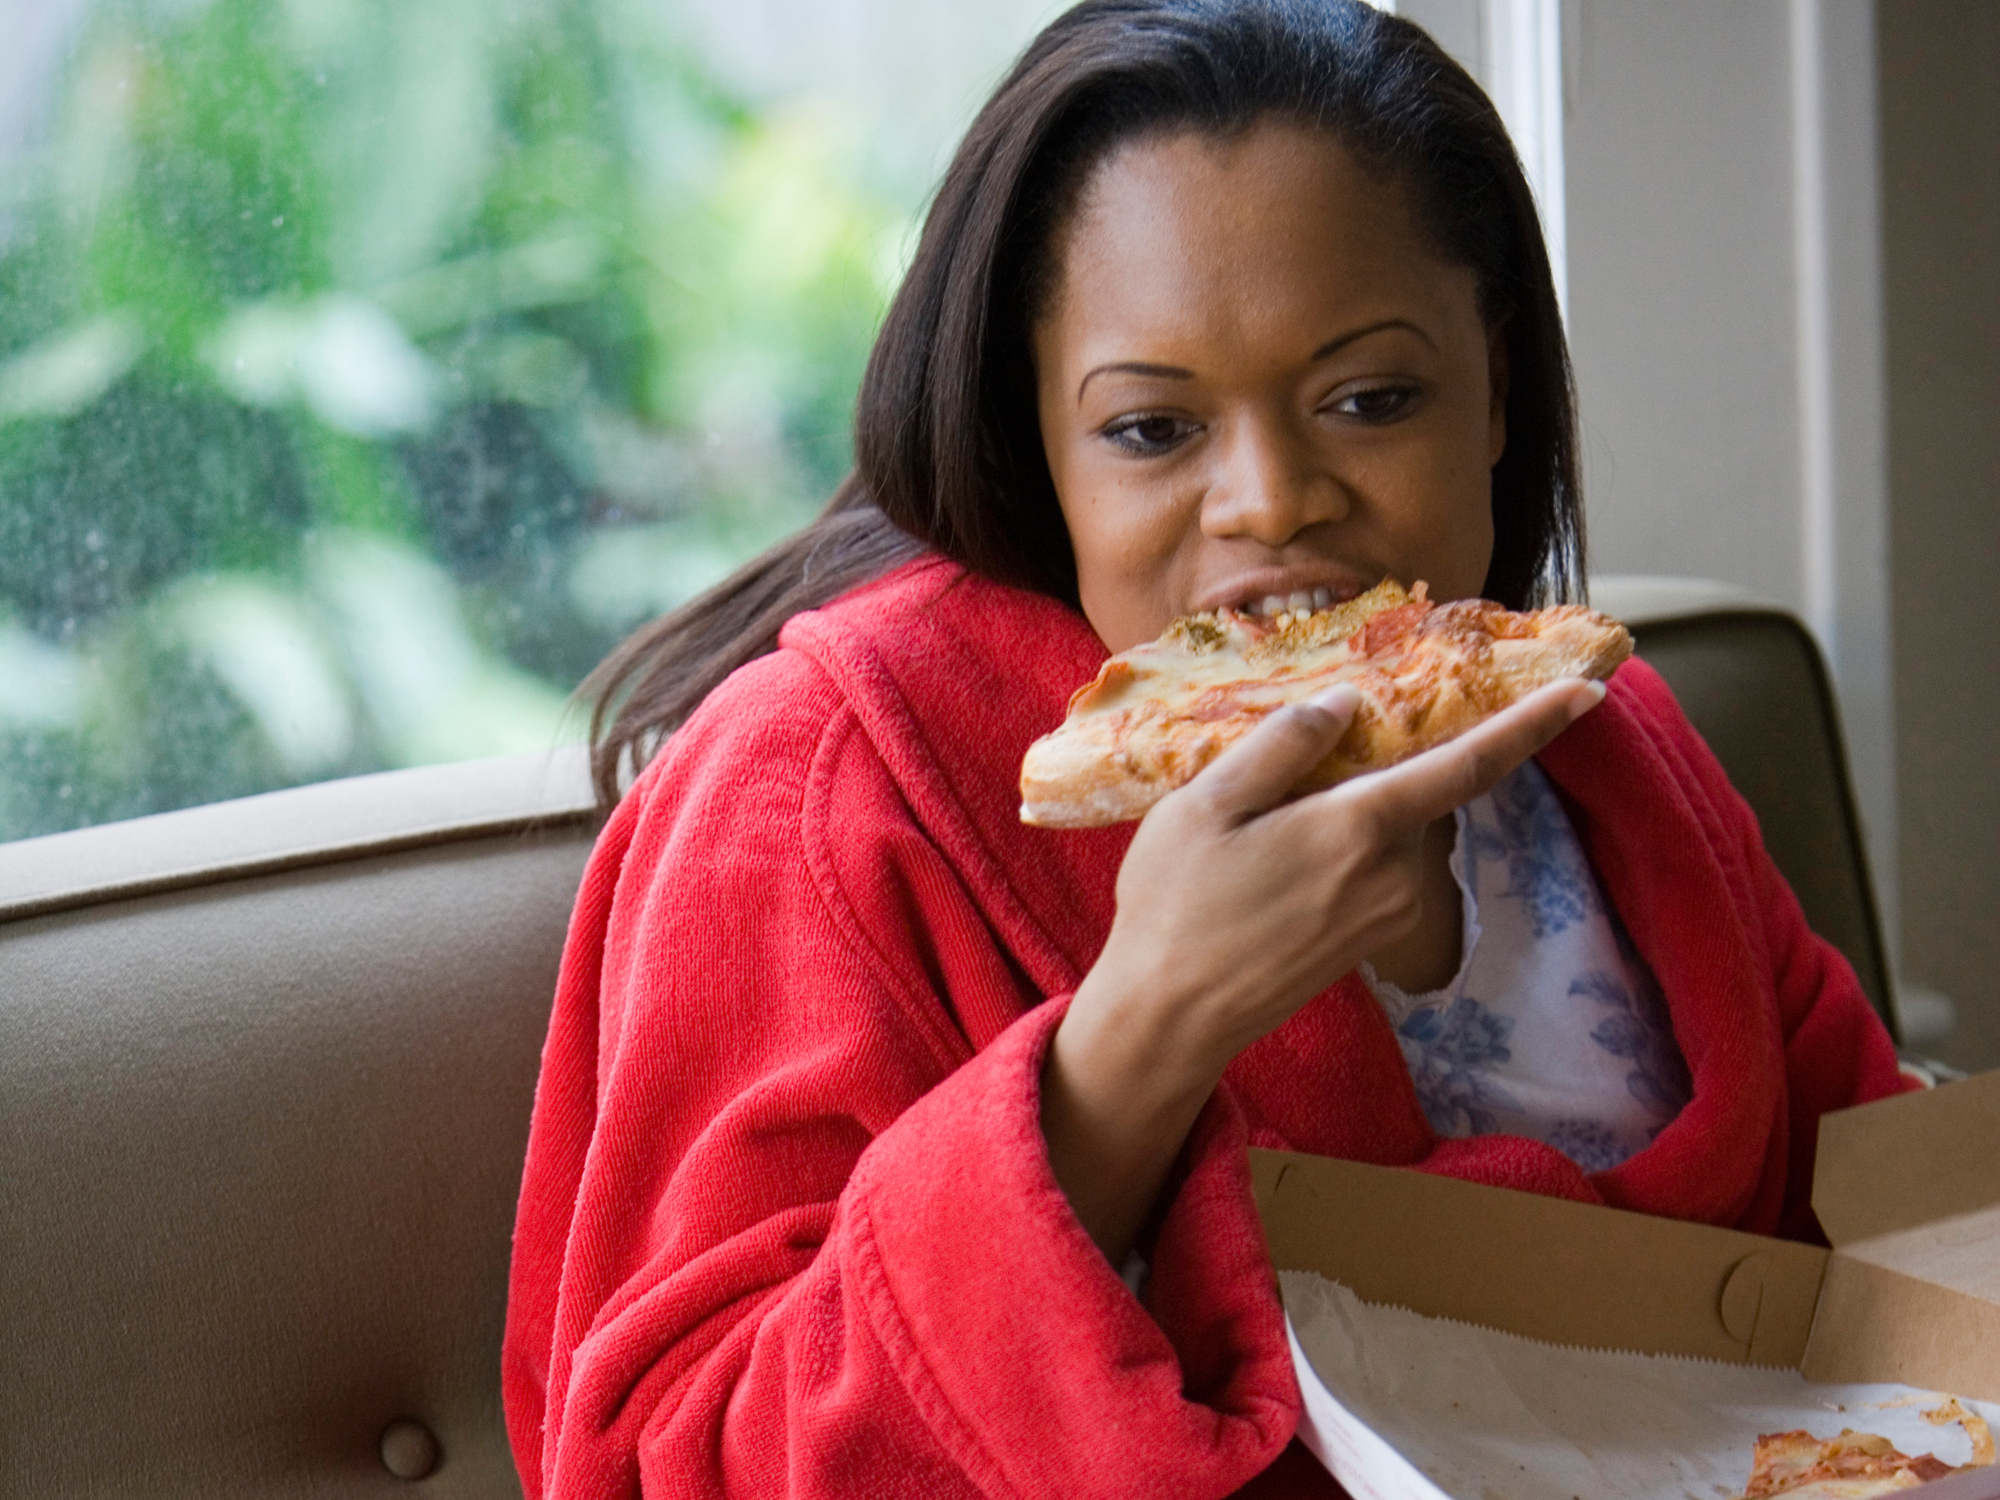 4 Surprising triggers that trick you into overeating